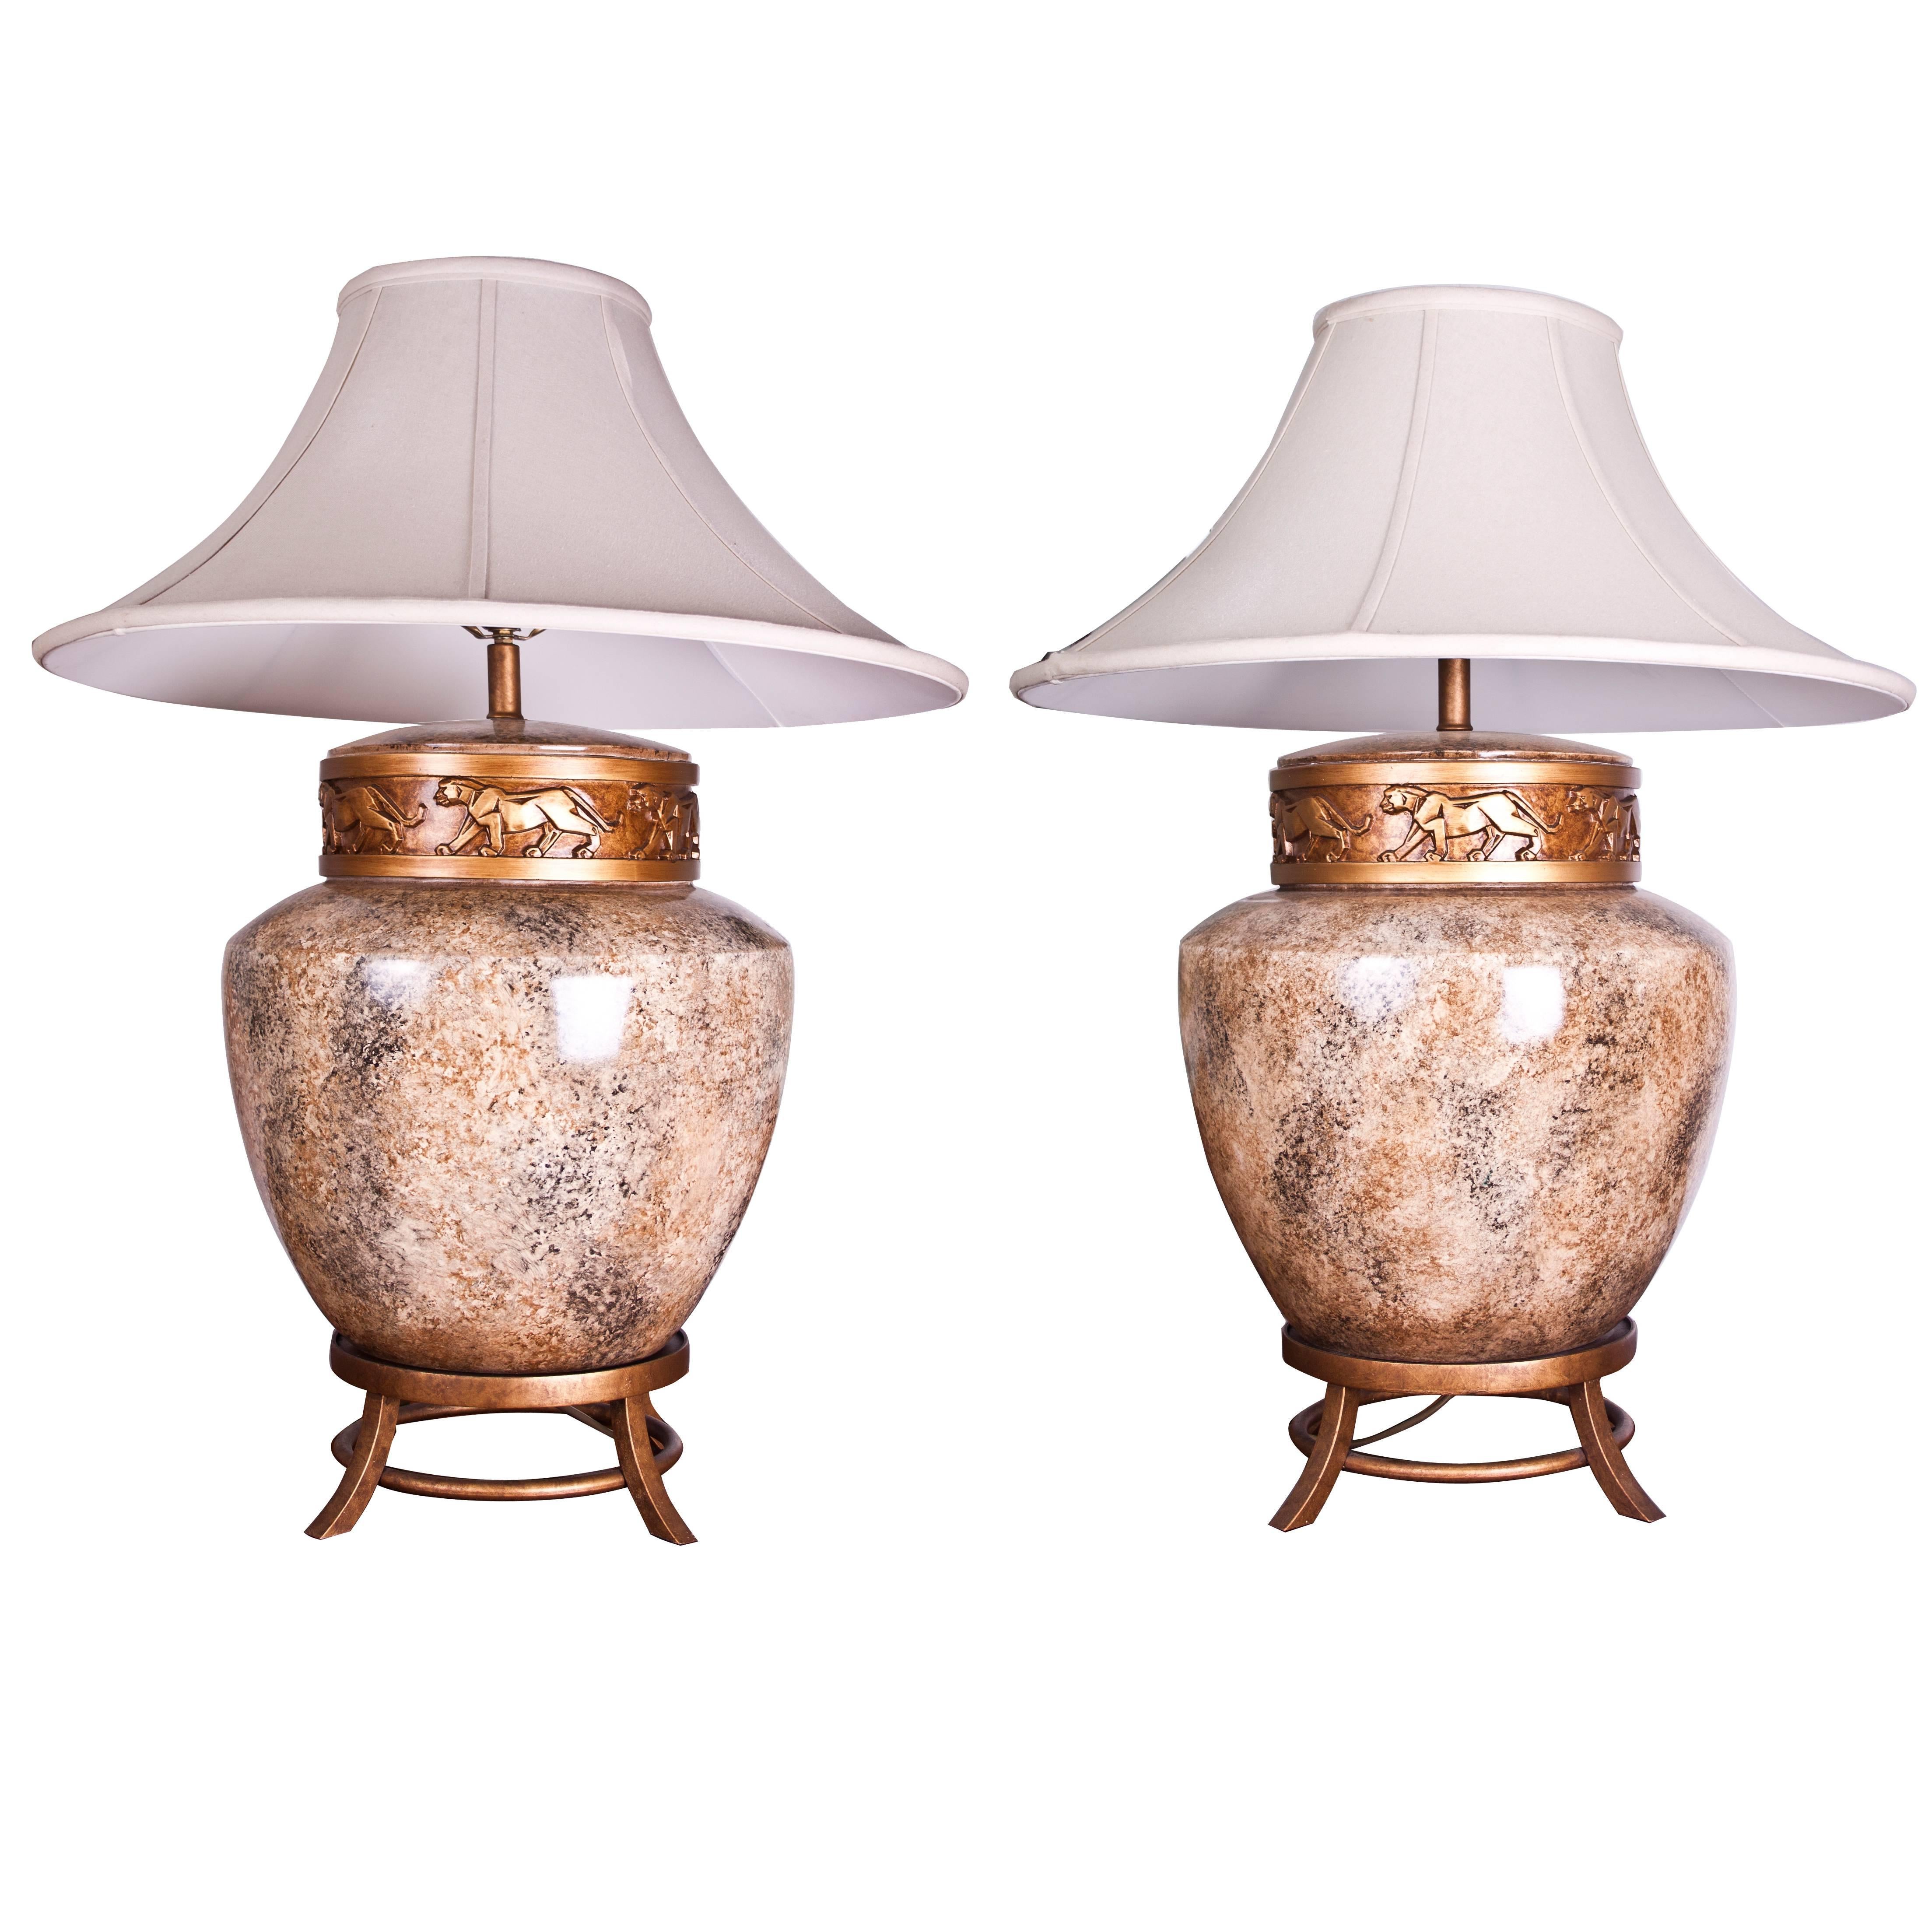 Pair of Large Art Deco Style Table Lamps